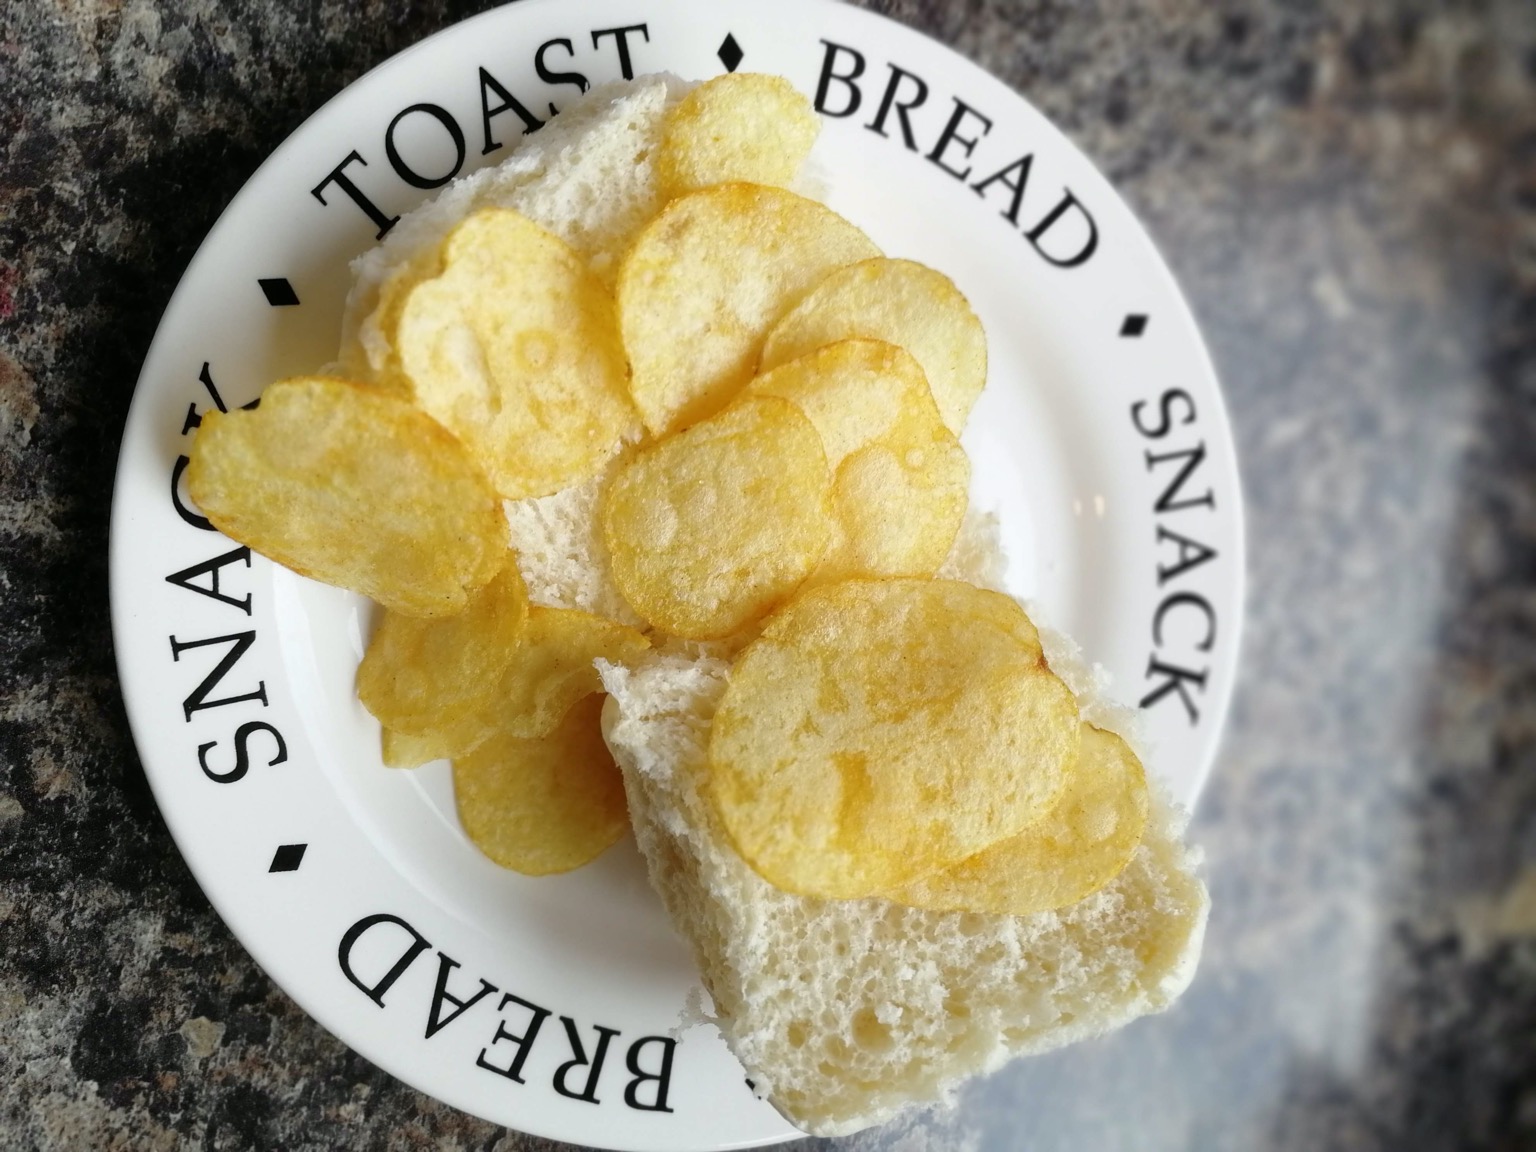 Overhead view of crisps on an open white roll